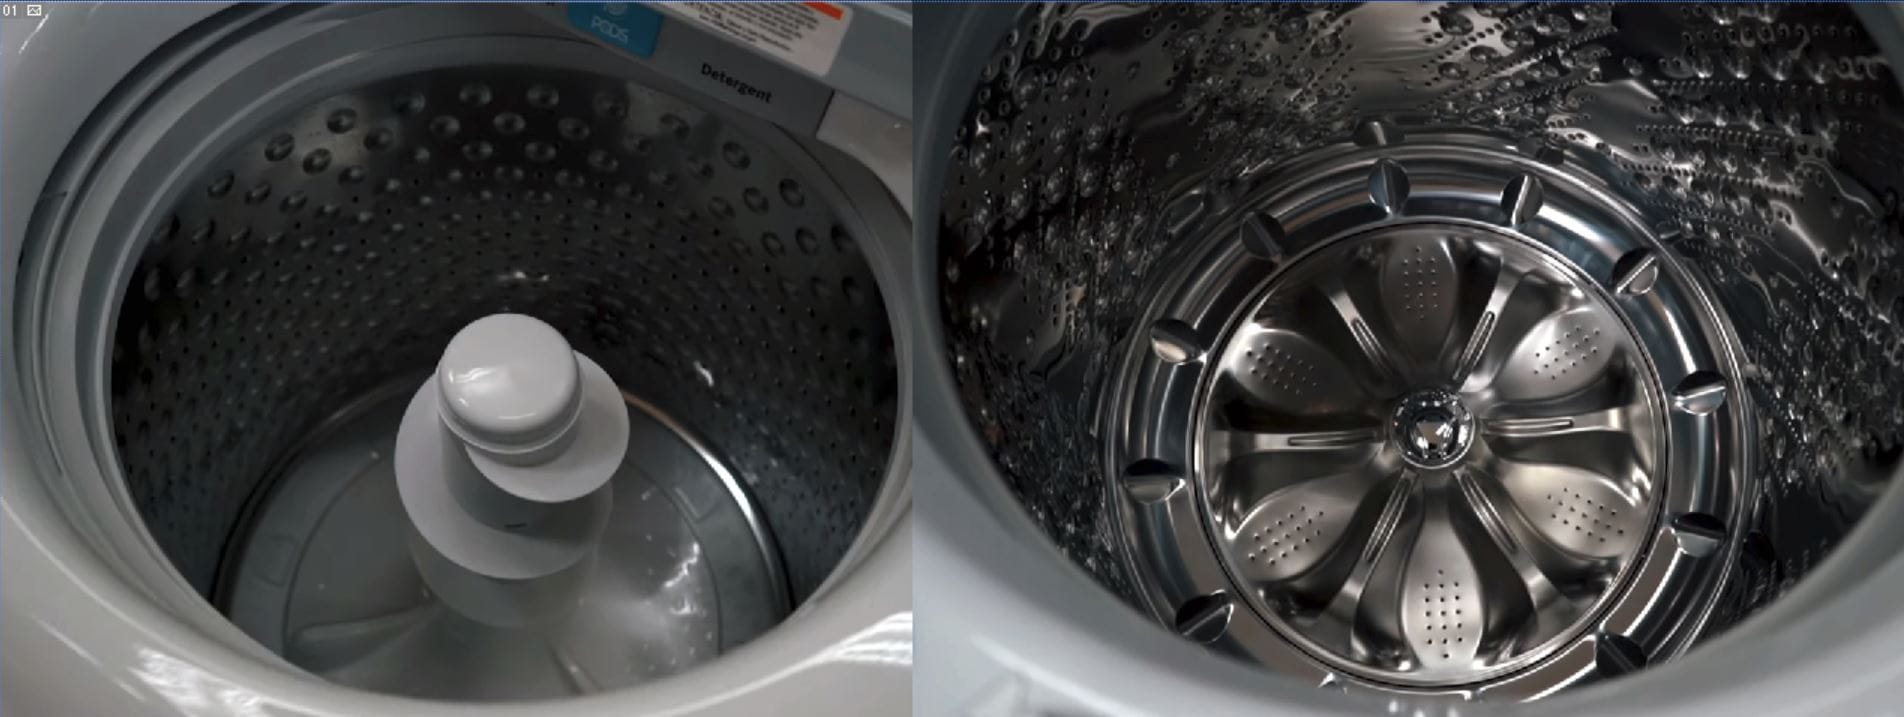 Which Washer Is Better Agitator Or Impeller